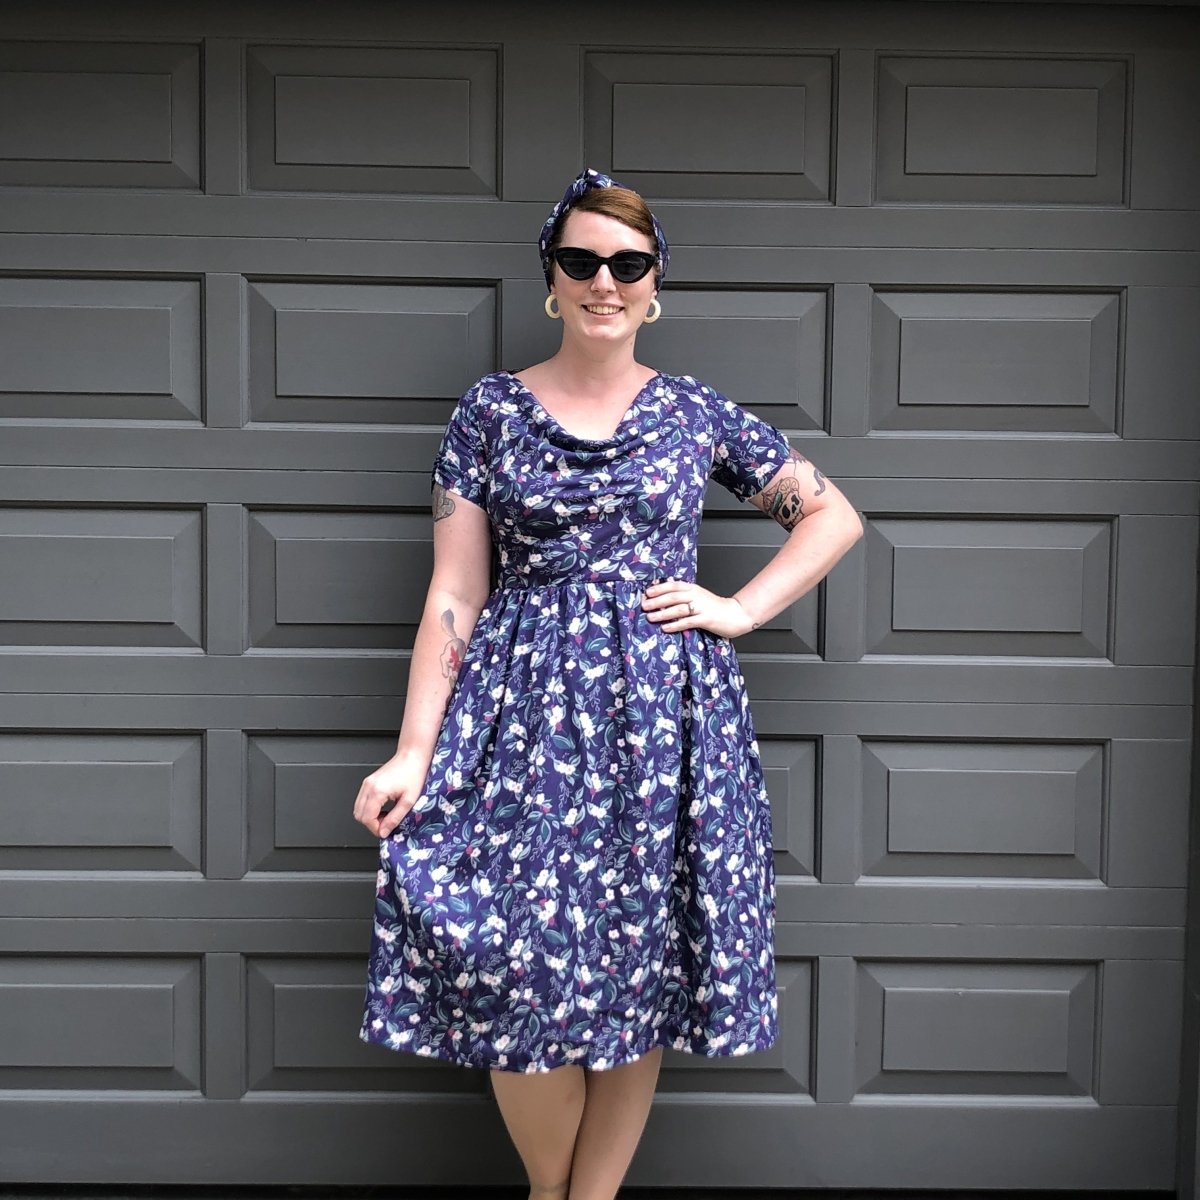 Vintage style dress in a 1950s silhouette in a bramble print as worn by Lottie who is standing with one hand on her hip as she smiles straight to the camera.